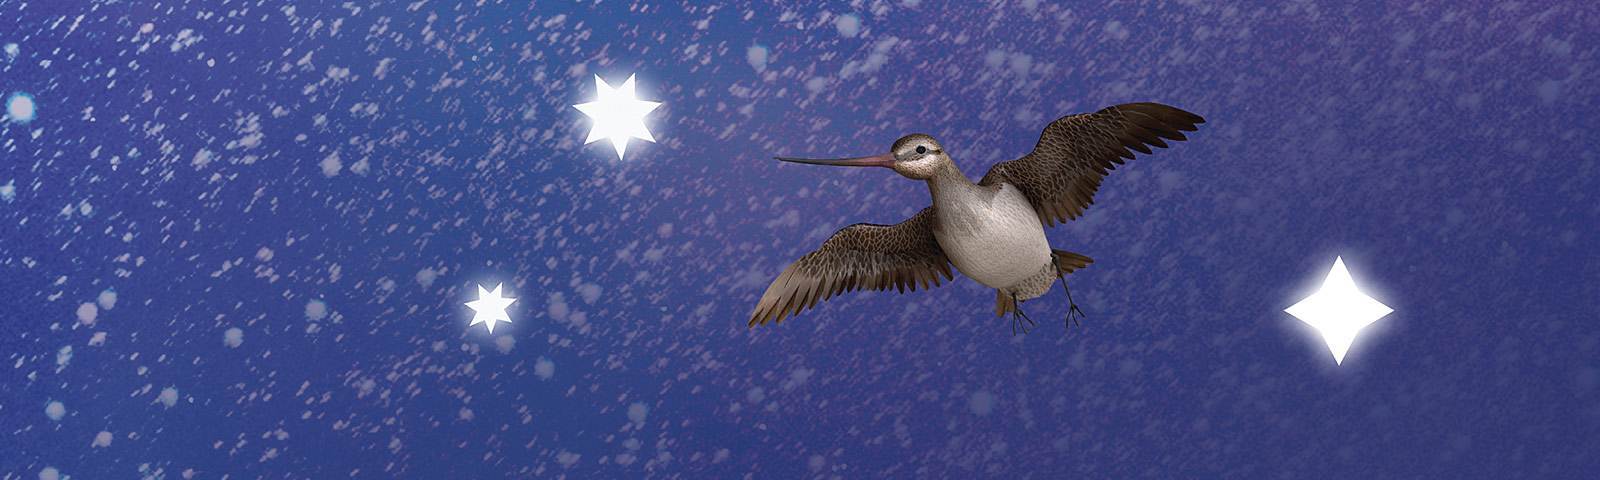 Colour artwork showing a kuaka (bar-tailed godwit) flying with stars in the background.